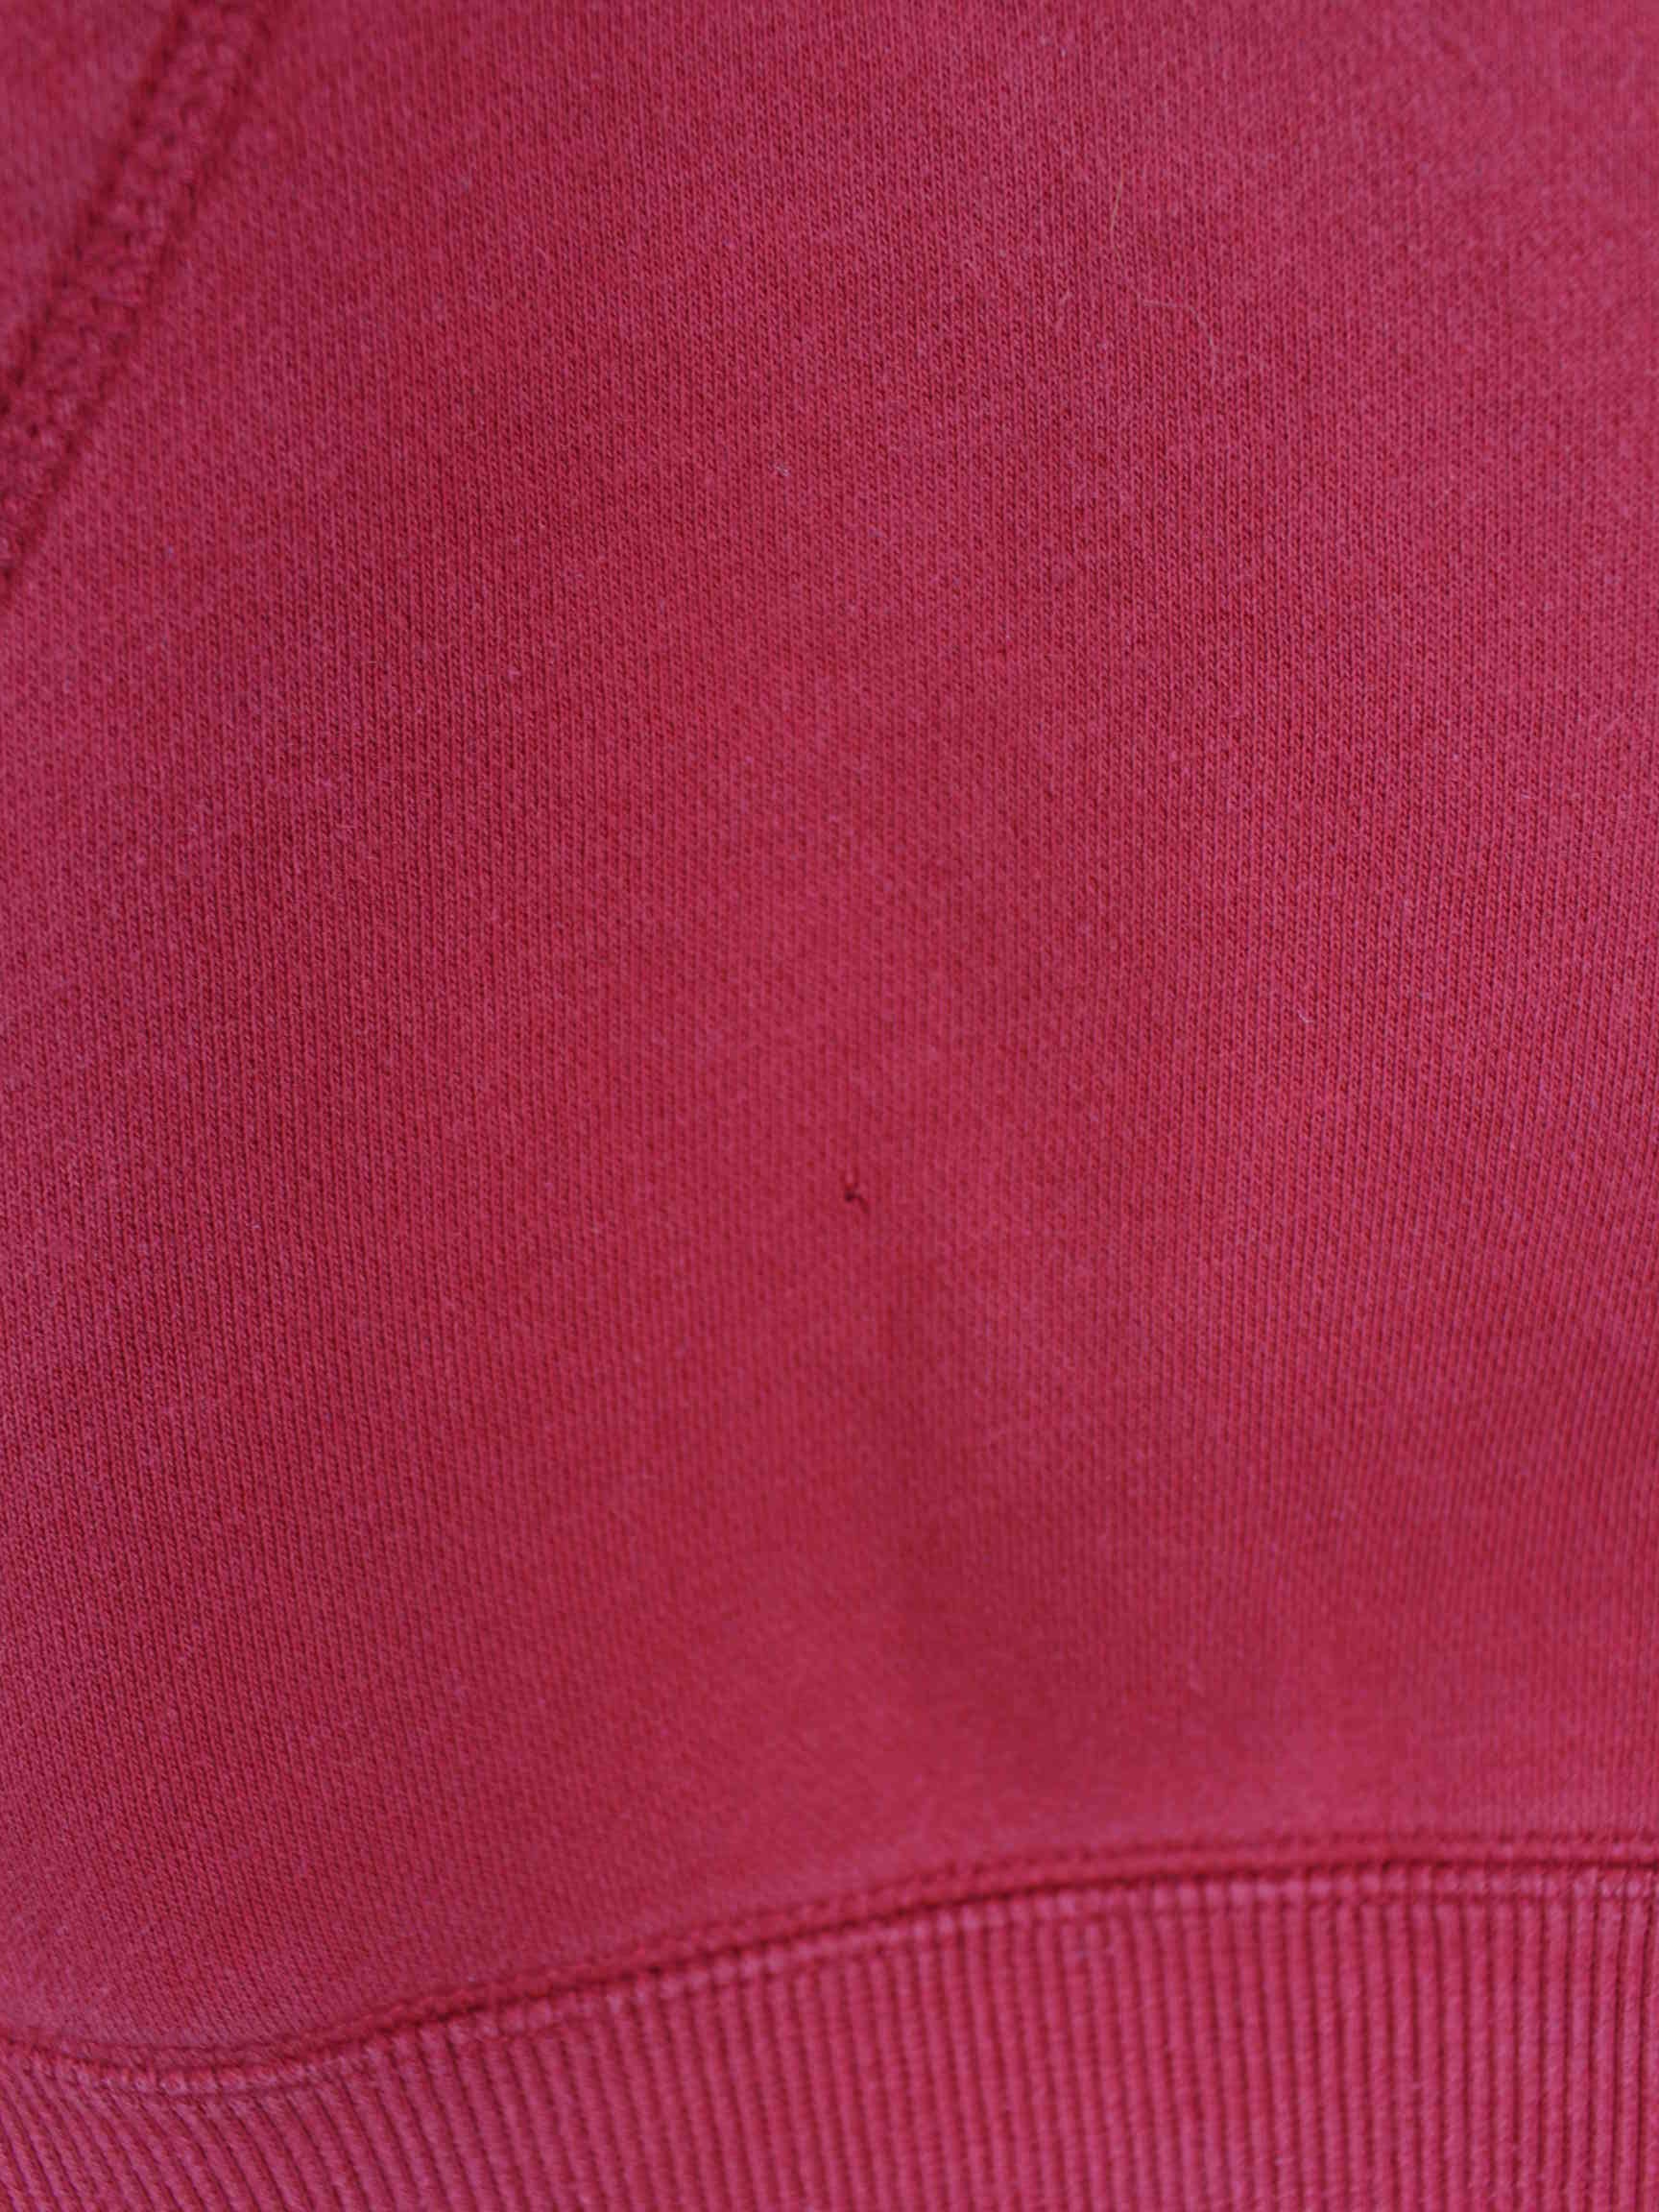 Nike Athletic Big Swoosh Embroidered Hoodie Rot XL (detail image 3)